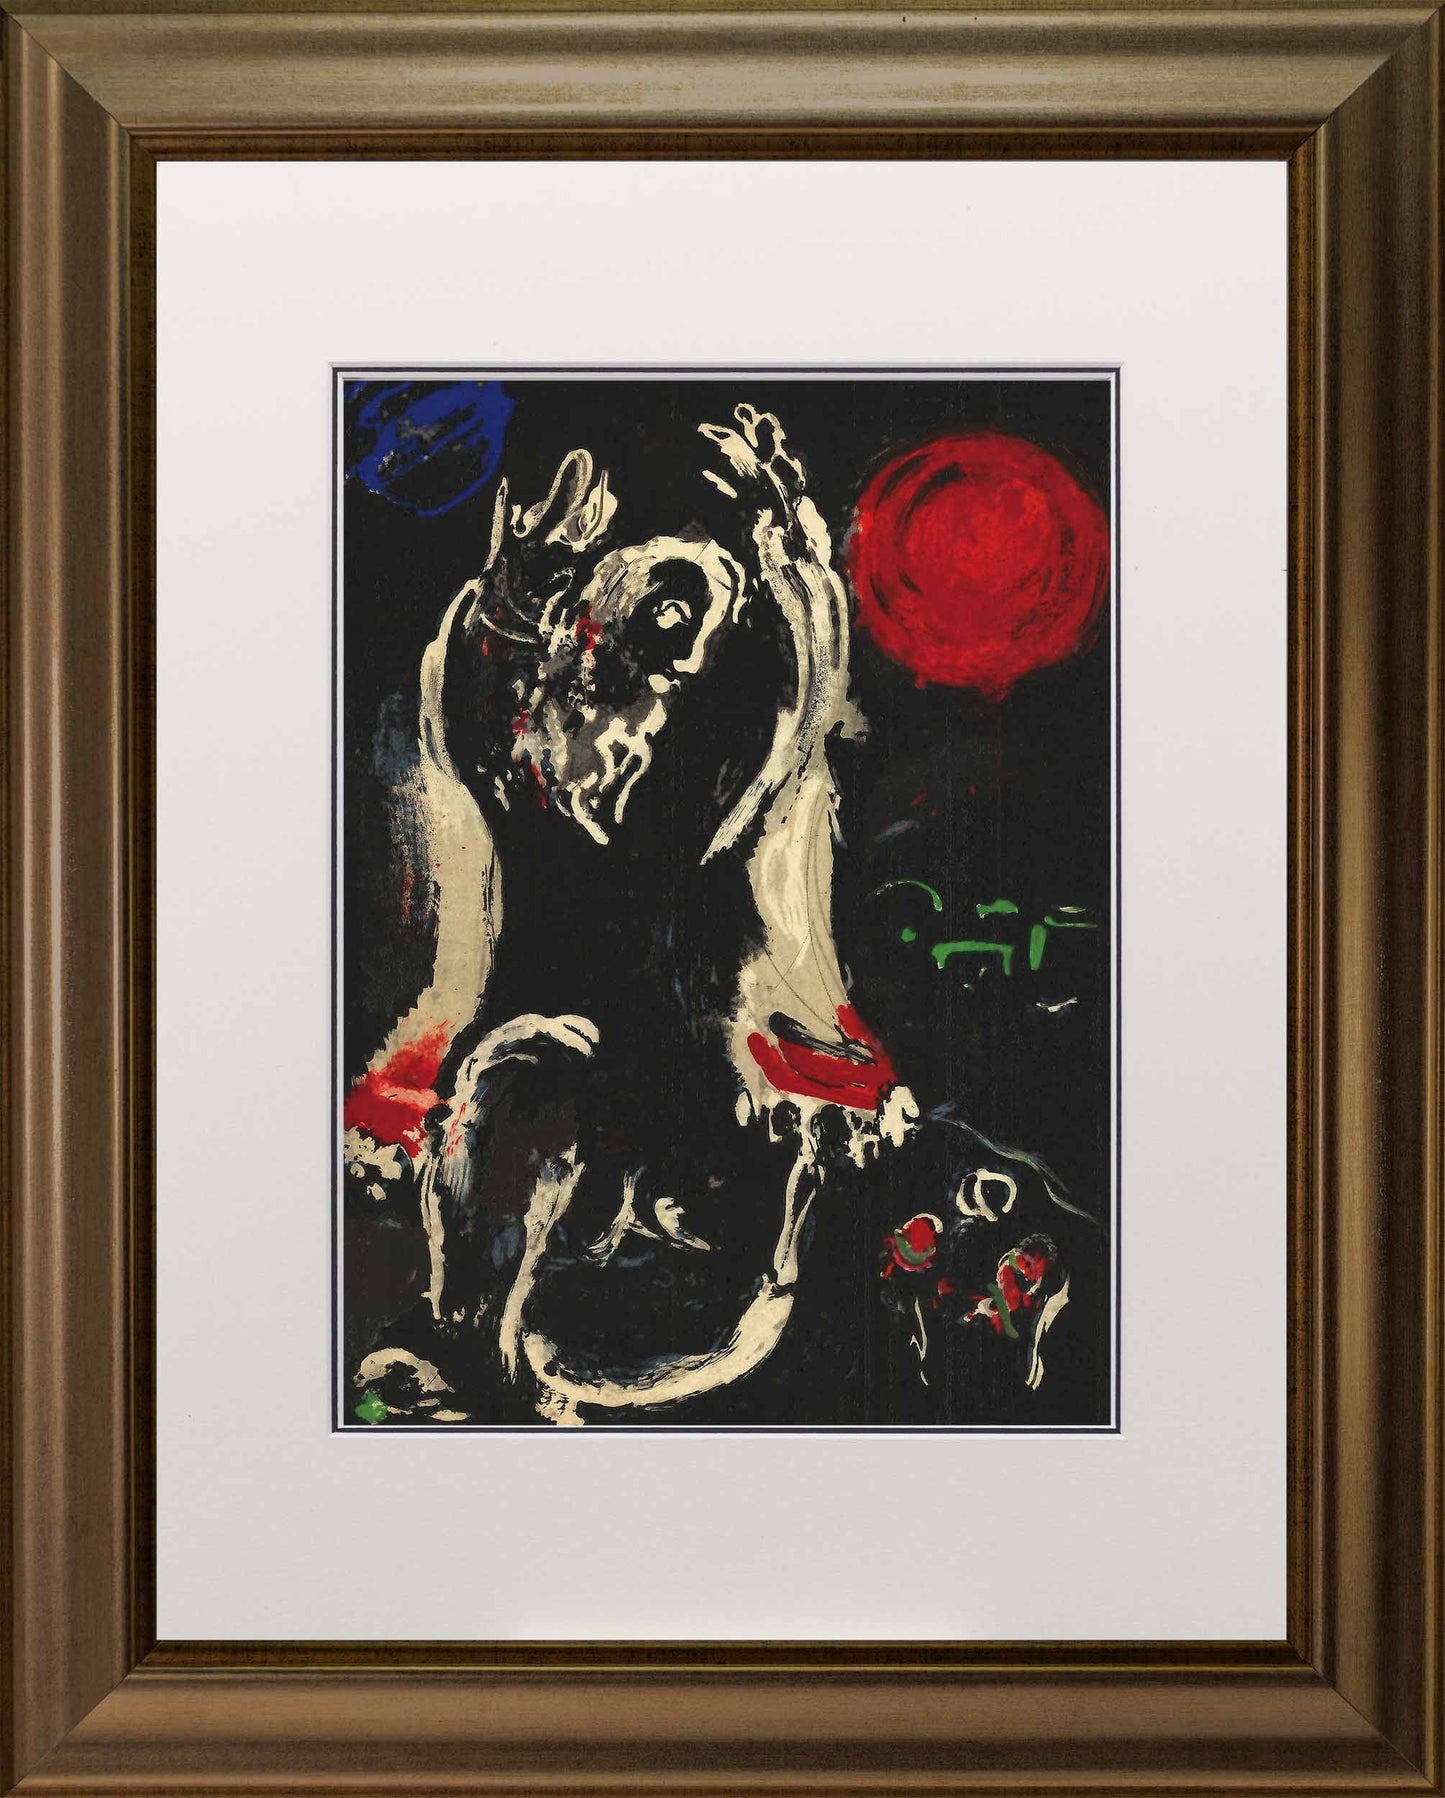 Marc Chagall Isaie lithograph Verve – the bible frame